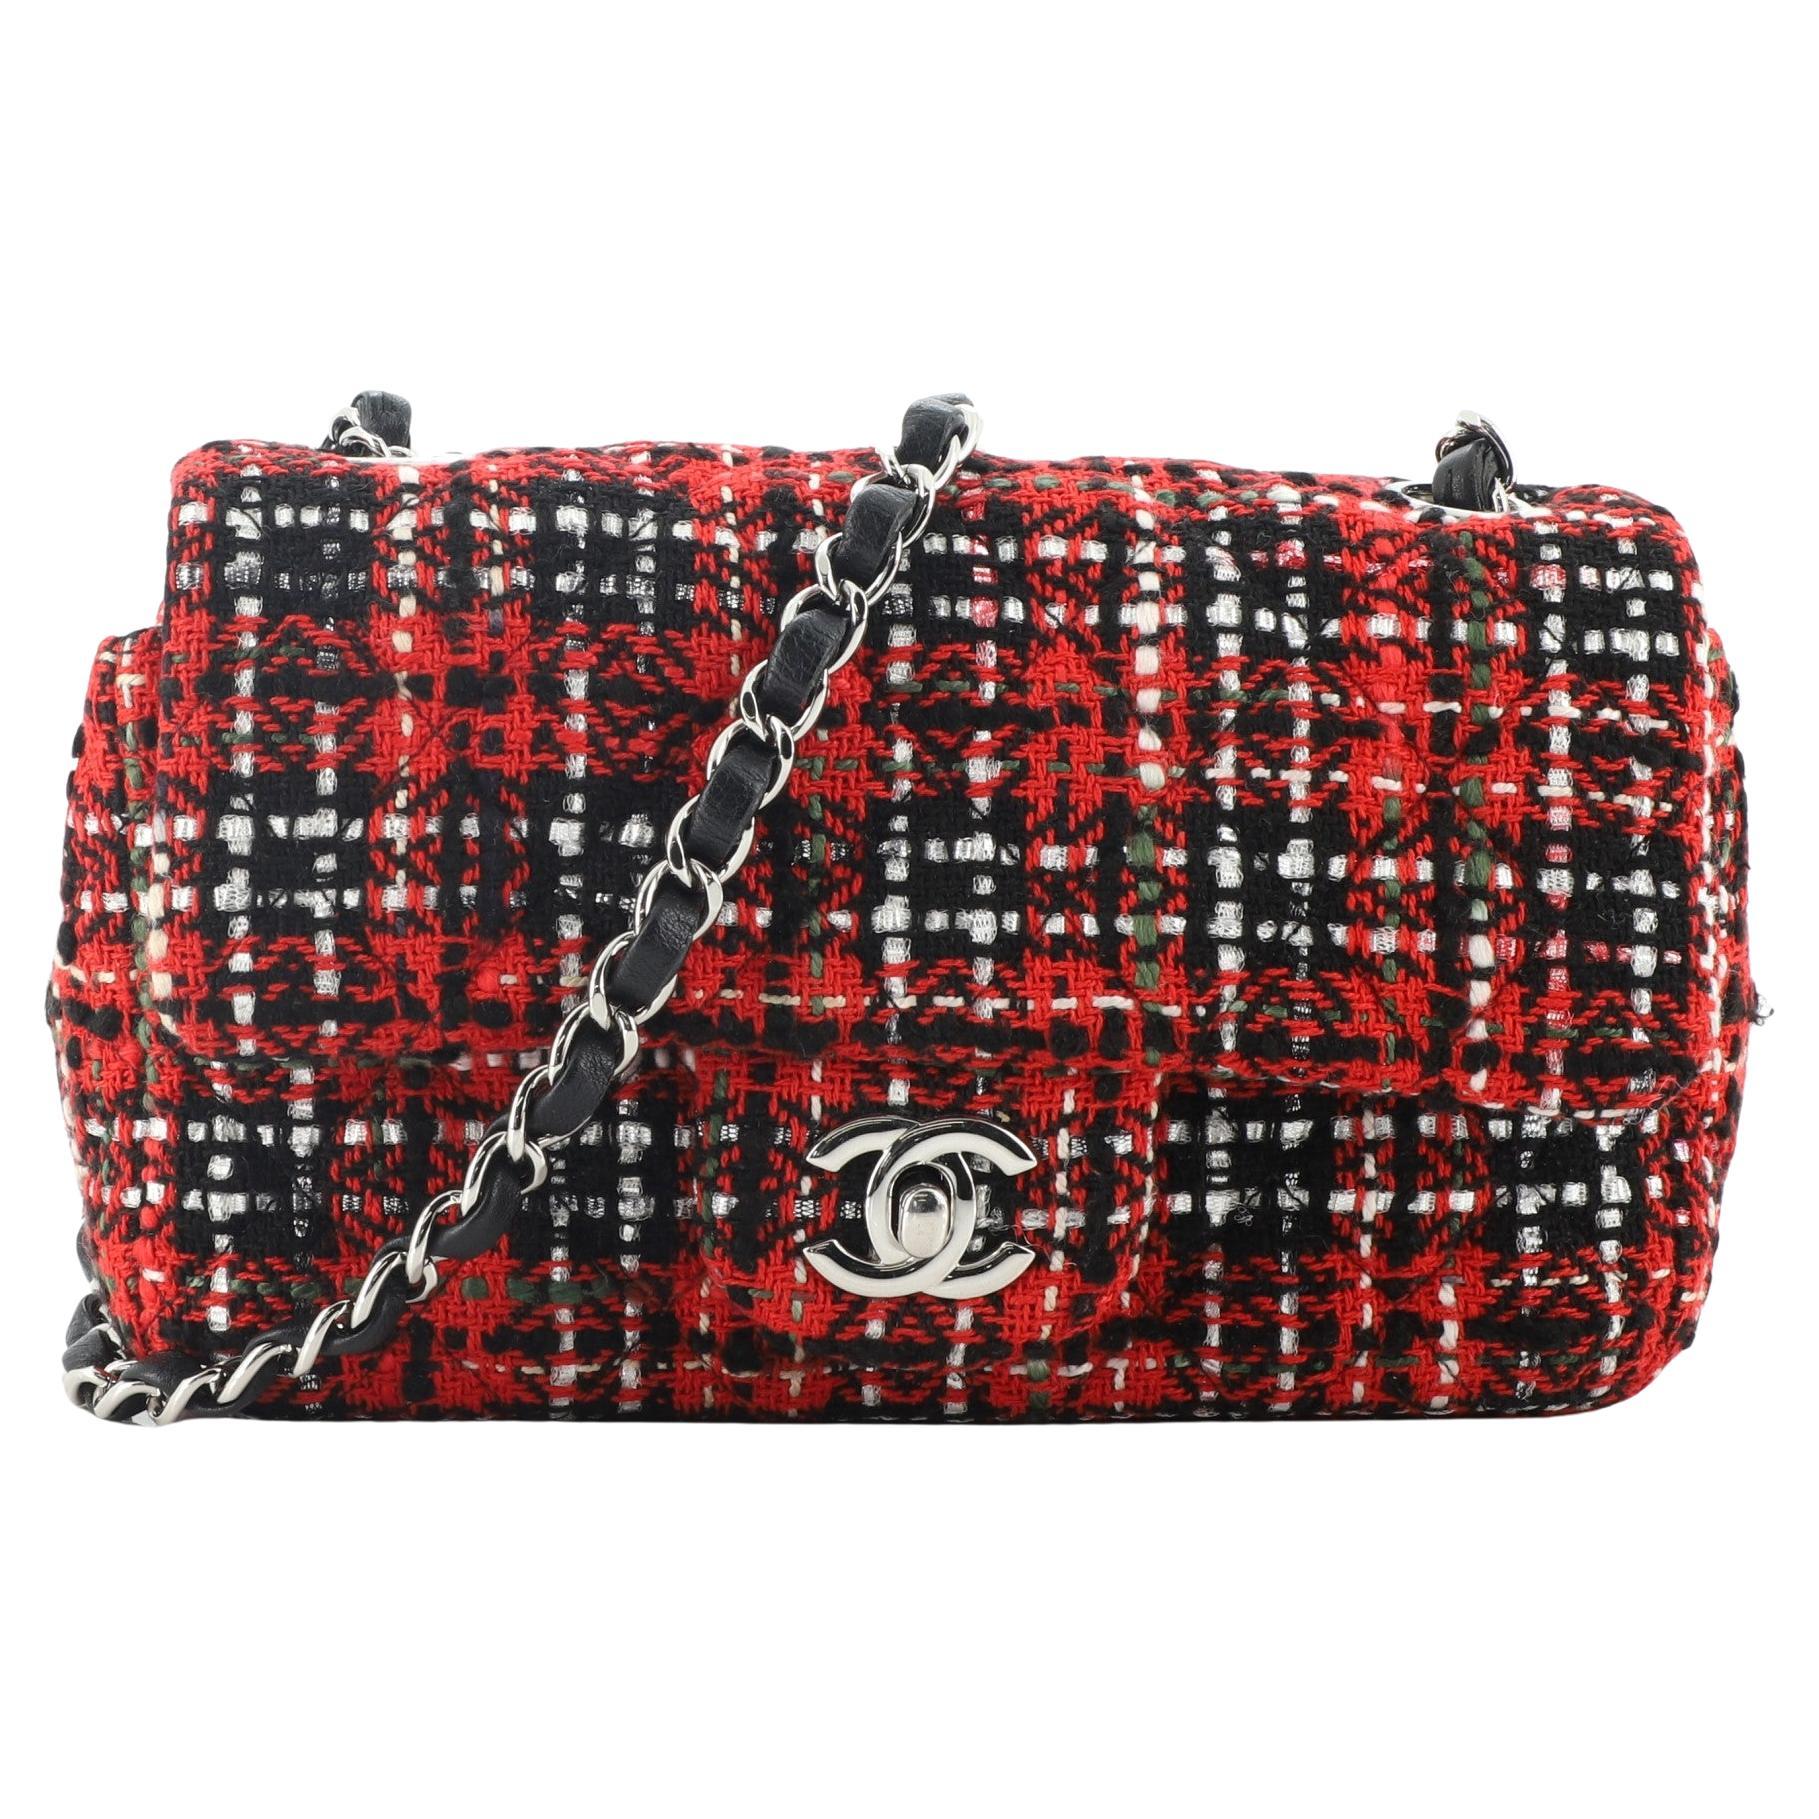 Chanel Classic Single Flap Bag Quilted Tweed Mini